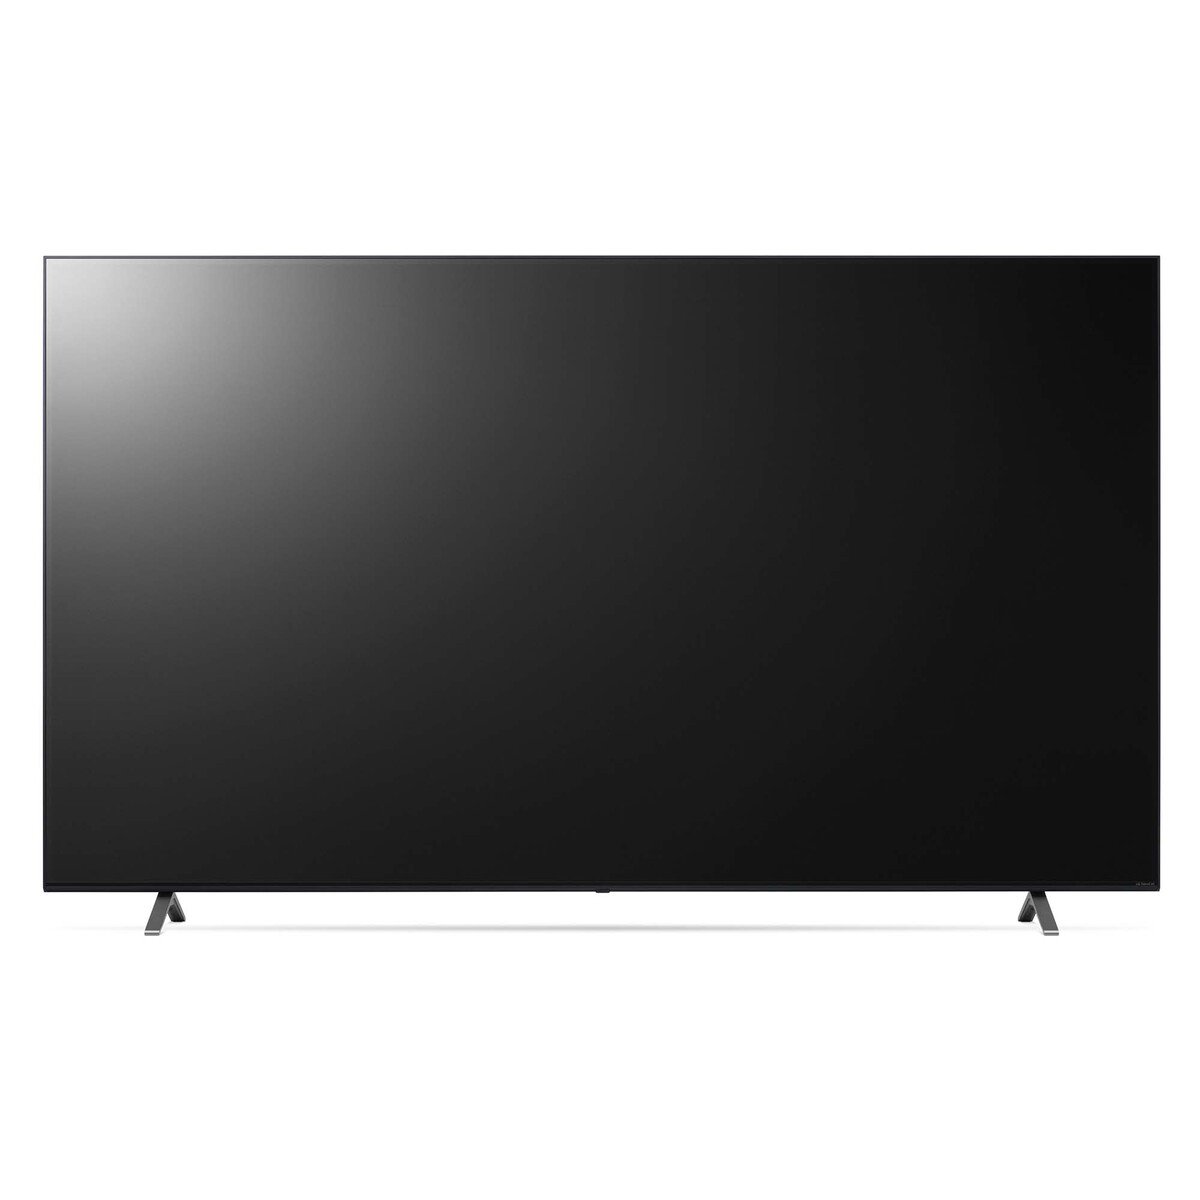 LG NanoCell TV 75 Inch NANO85 Series, New 2021 Cinema Screen Design 4K Cinema HDR webOS Smart with ThinQ AI Local Dimming